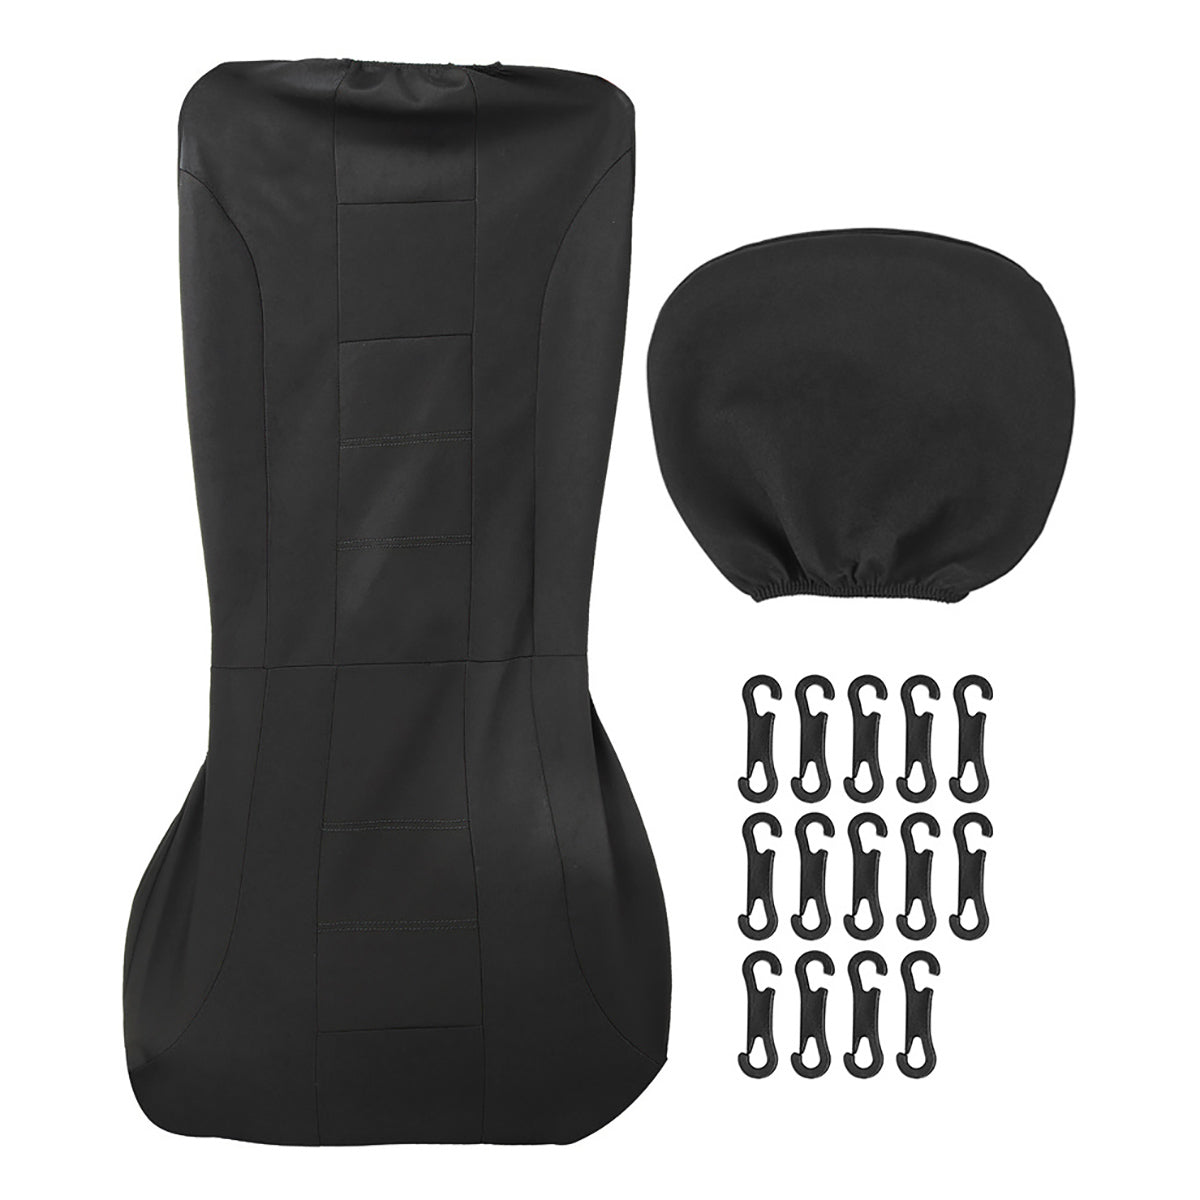 Auto Seat Covers for Car Truck SUV Van Universal Protectors Front Rear Covers - Auto GoShop